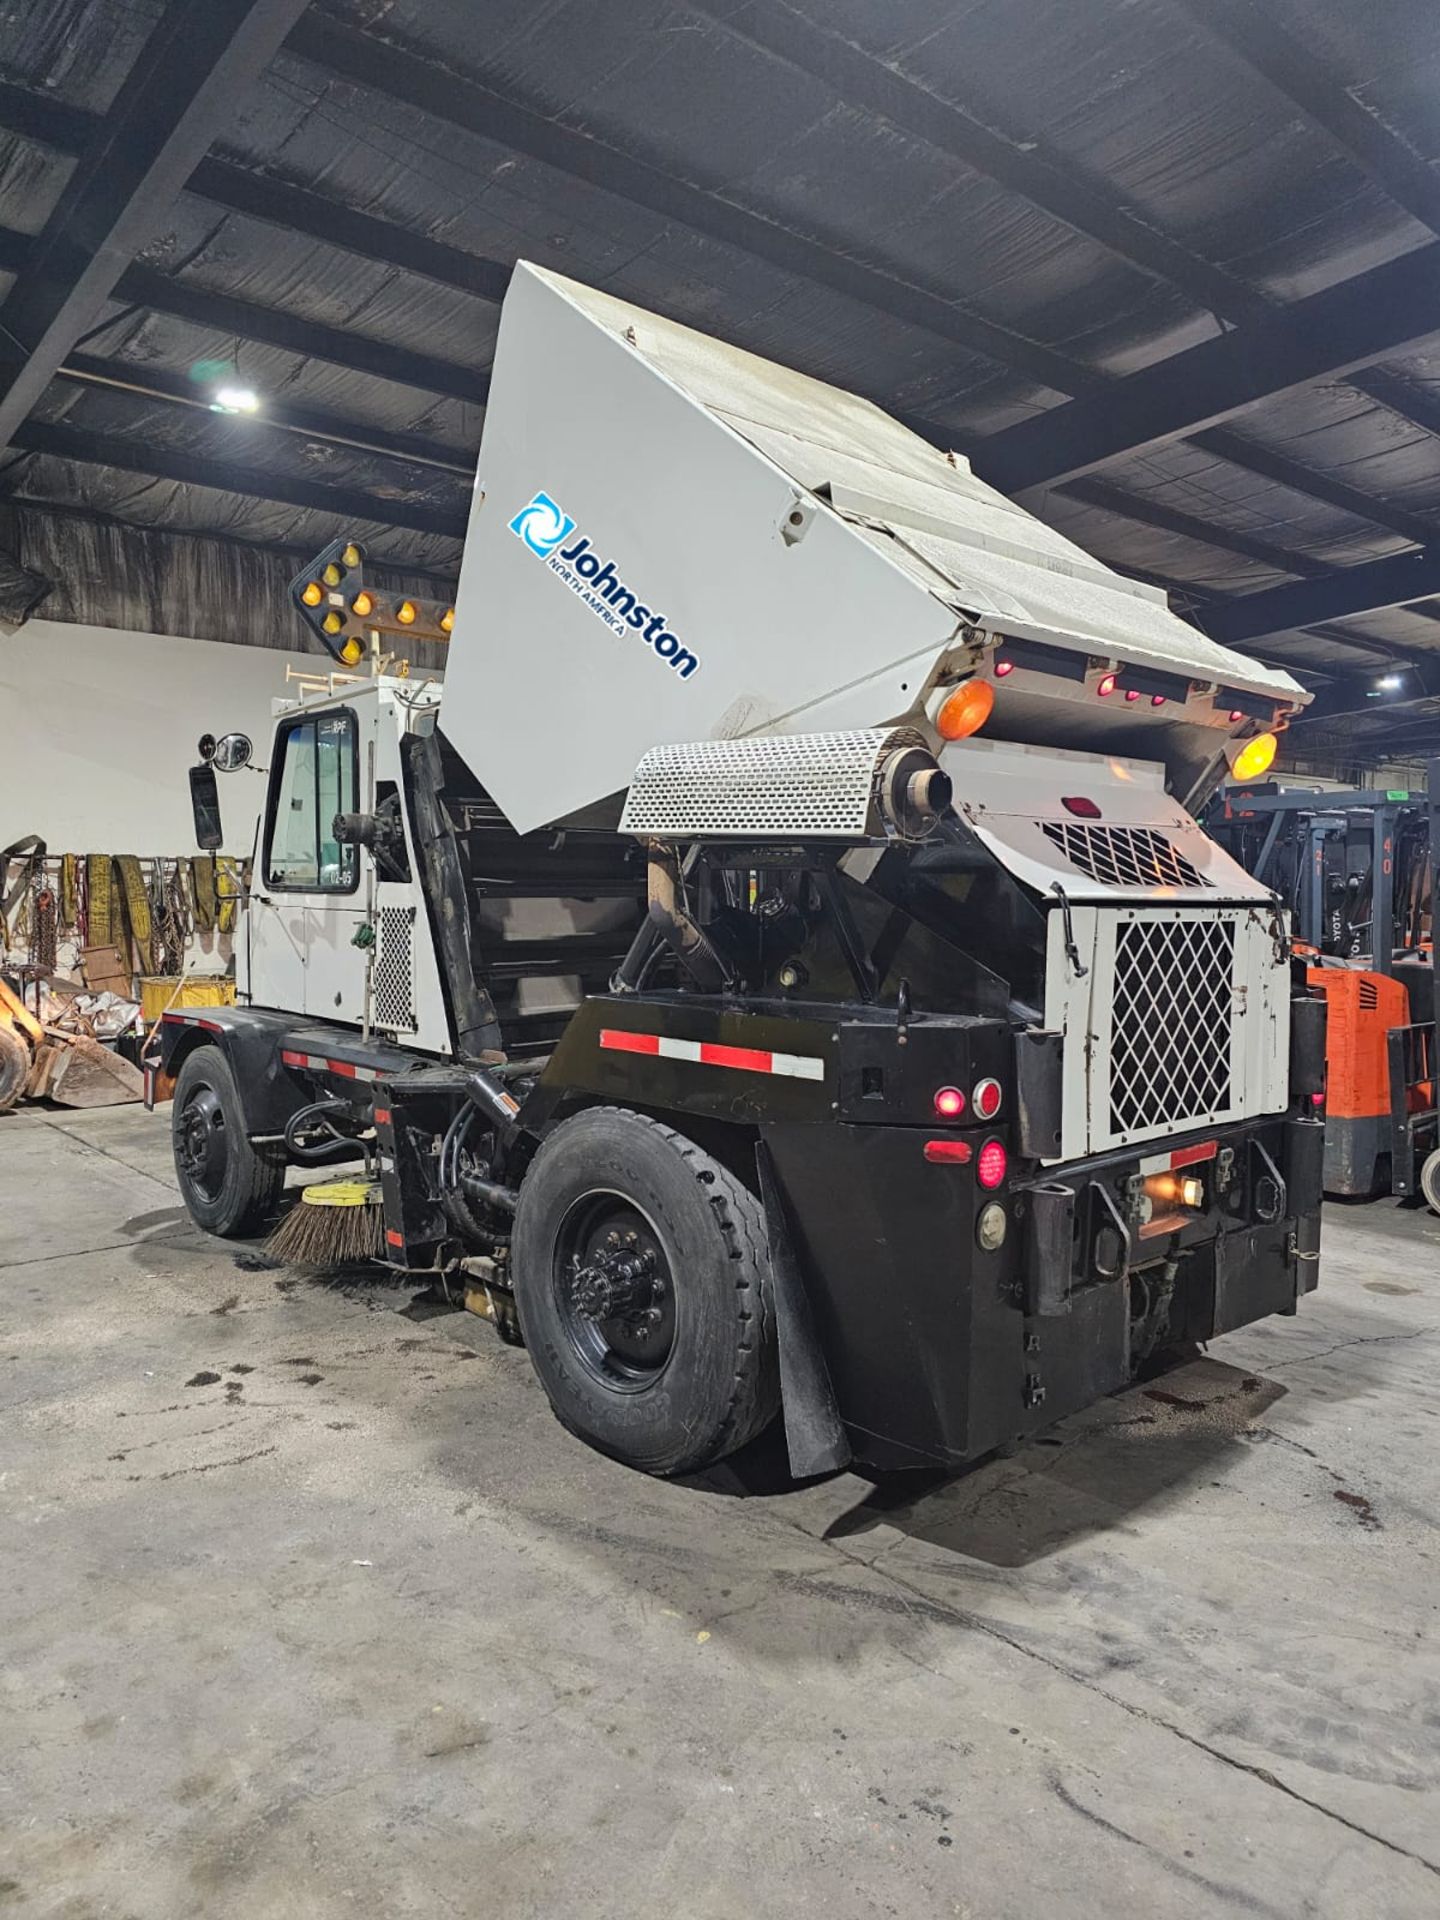 Johnston Model 4000 Outdoor Street Sweeper Scrubber Unit - Diesel with Low Hours and 2 seats - Image 2 of 7